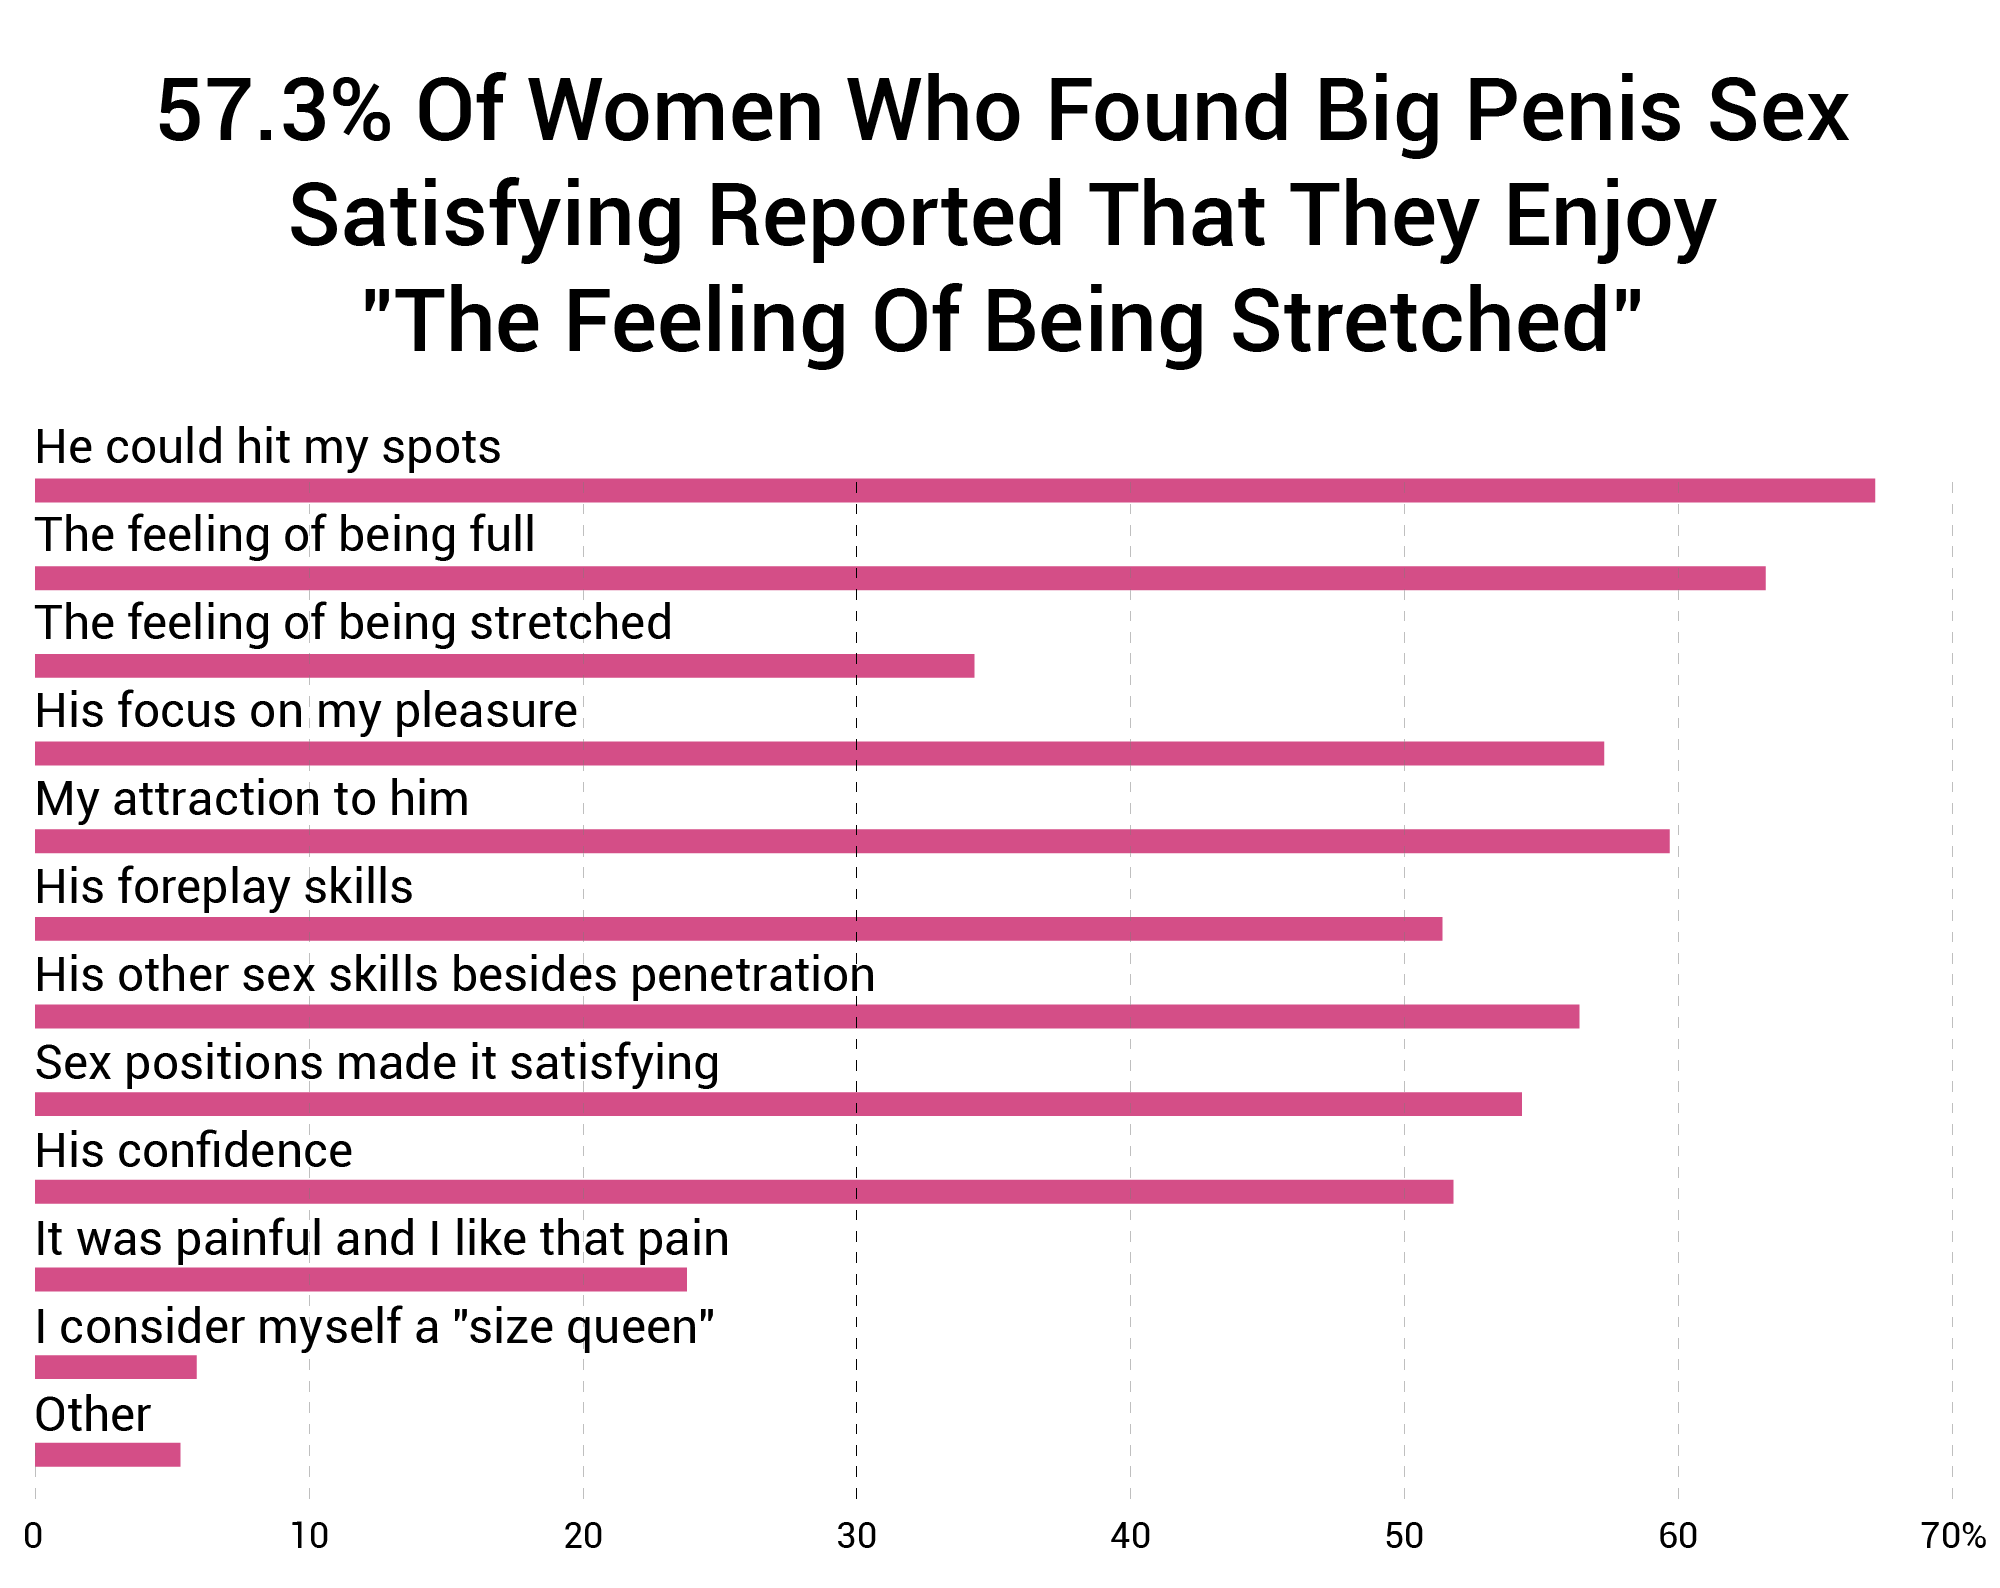 57.3-Of-Women-Who-Found-Big-Penis-Sex-Satisfying-Reported-That-They-Enjoy-22The-Feeling-Of-Being-Stretched22.png